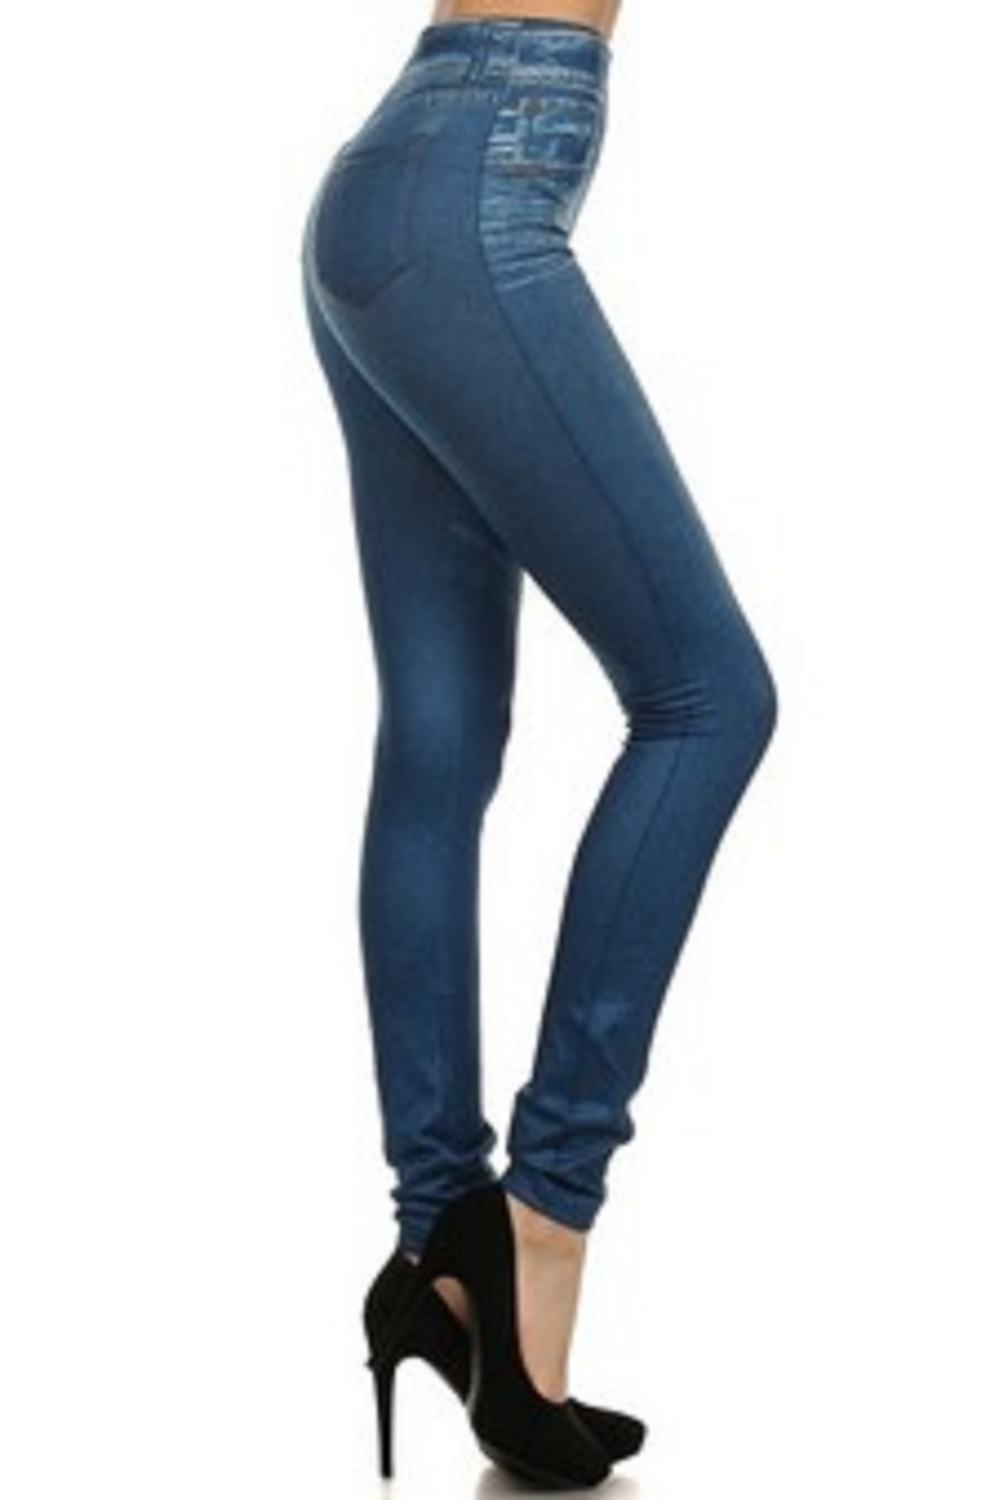 Happy Leggings Distressed Jean Sublimation Printed Fleece-Lined Leggings with Back Pockets, S/M Denim Blue